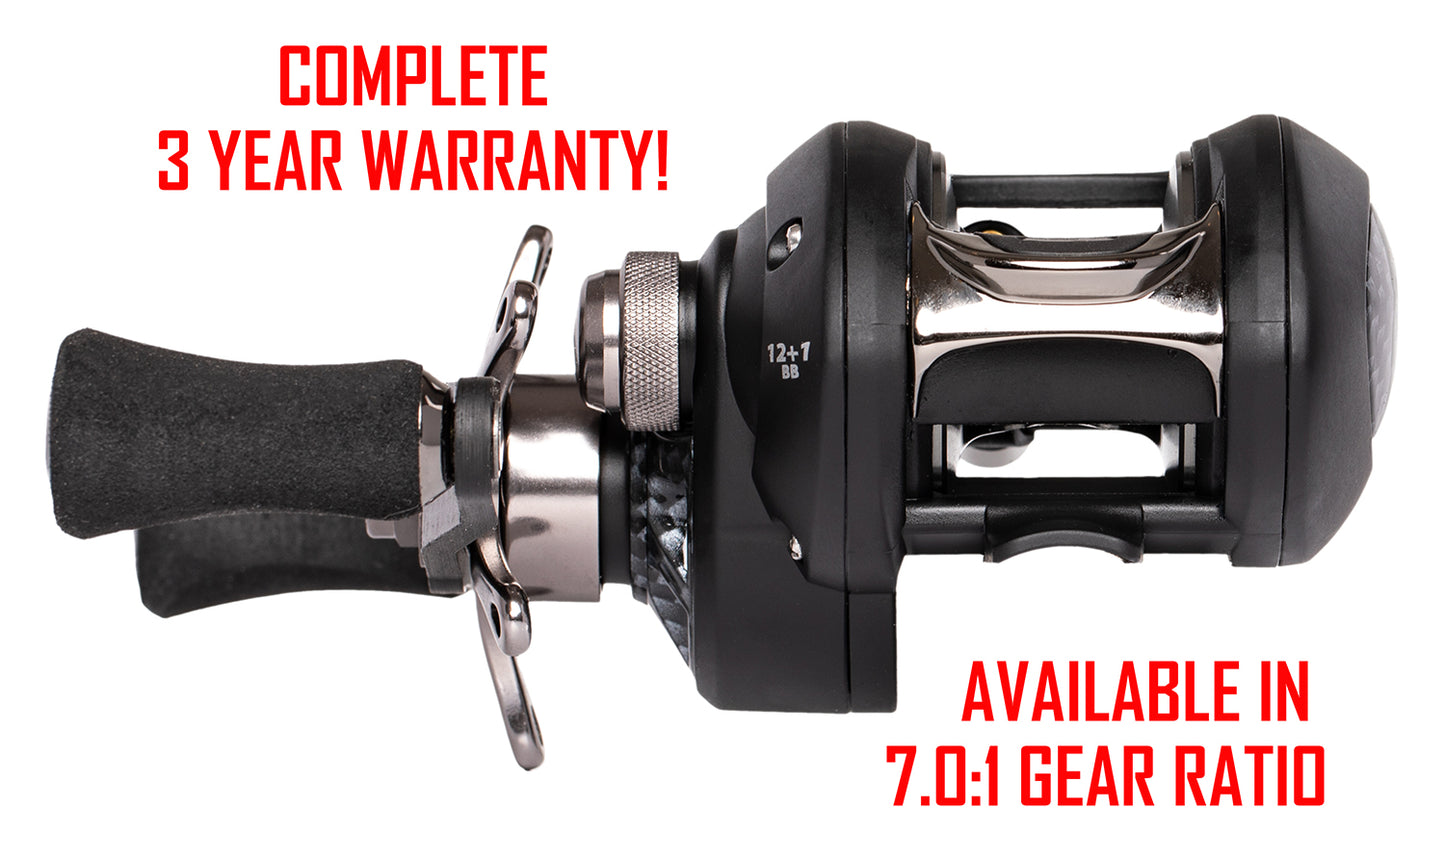 C-FORCE BAITCASTING REEL - LEFT HAND. RED text:  COMPLETE 3 YEAR WARRANTY! AVAILABLE IN 7.0:1 GEAR RATIO